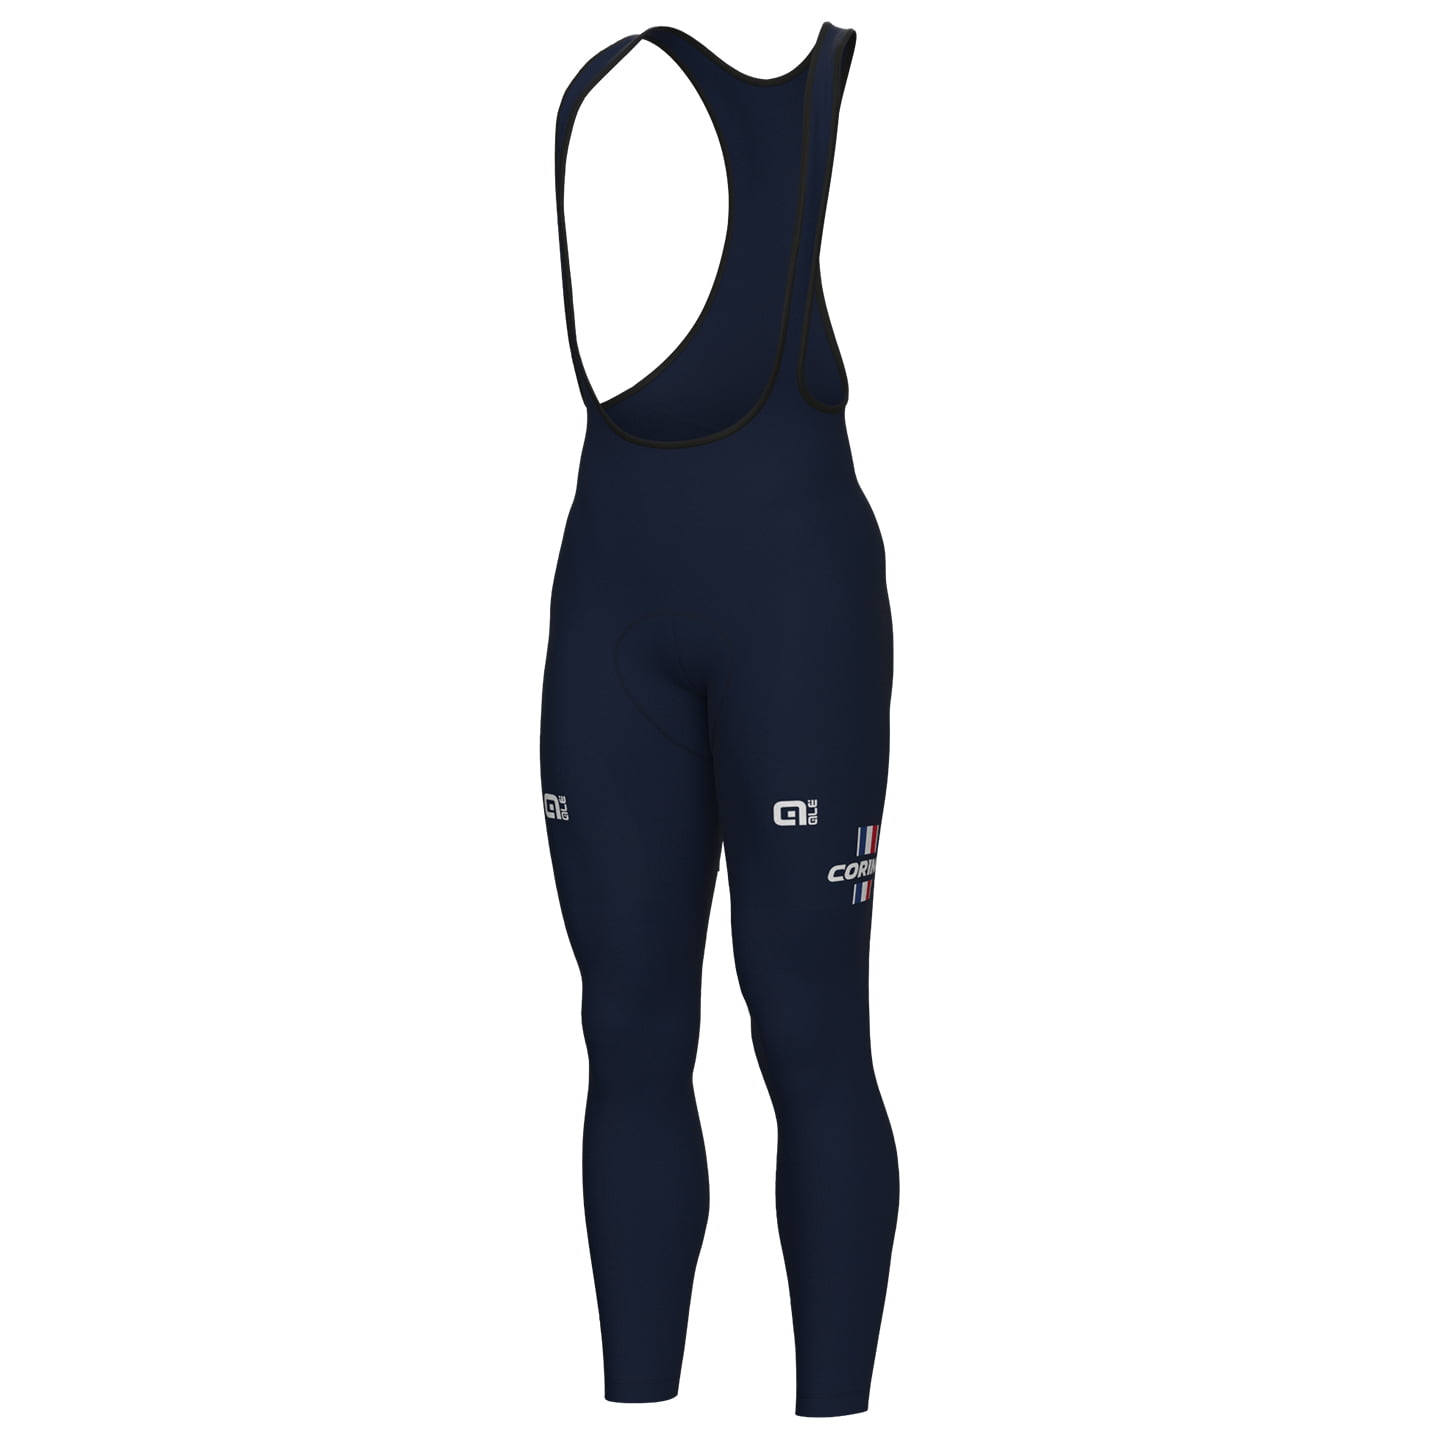 FRENCH NATIONAL TEAM 2023 Bib Tights, for men, size 2XL, Cycle trousers, Cycle gear